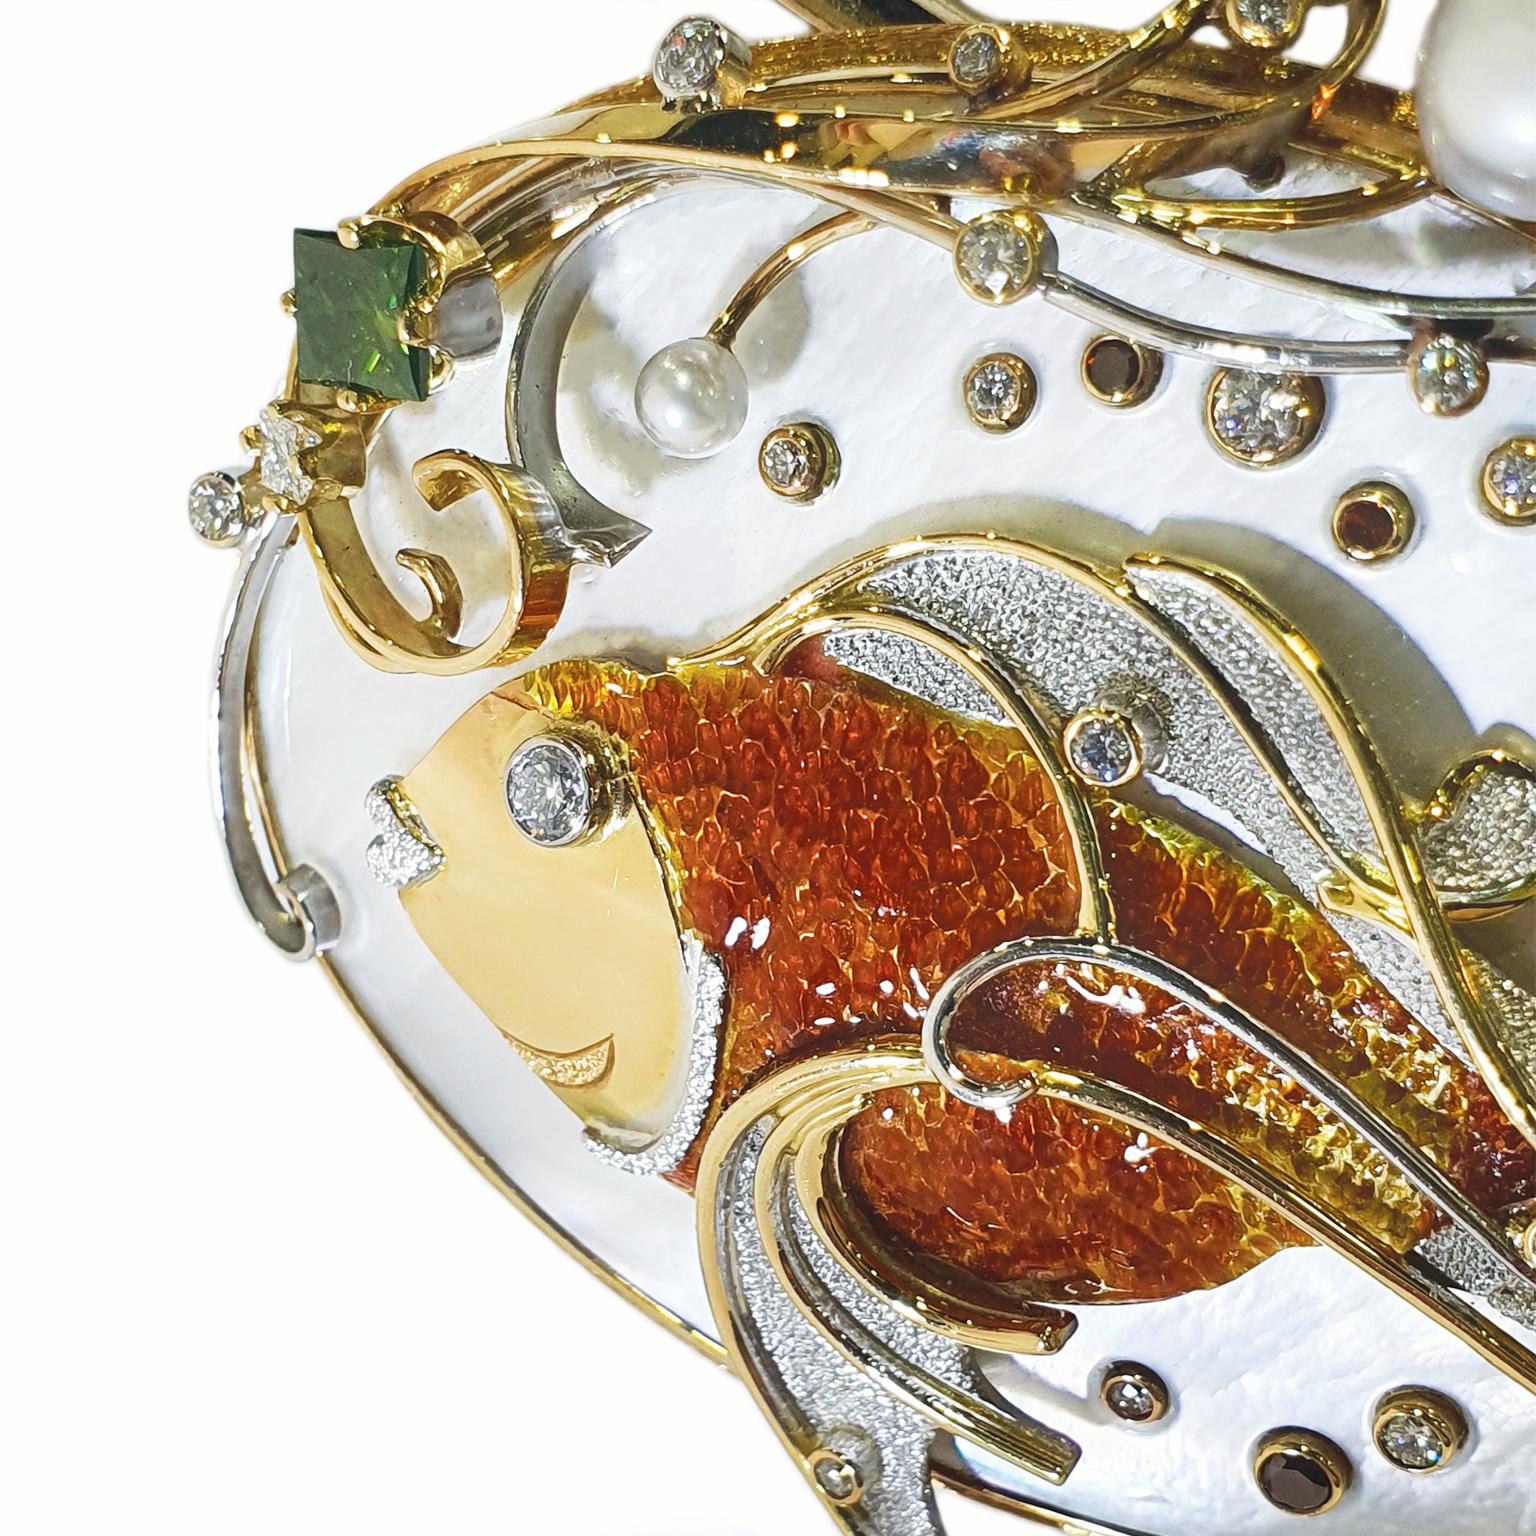 Paul Amey’s Fantail Goldfish pendant was crafted from 18K yellow and white gold with mother of pearl, diamonds and hard enamel.

Paul hand carved the oval base out of mother of pearl creating a “fluid” background for the stylized fantail goldfish.